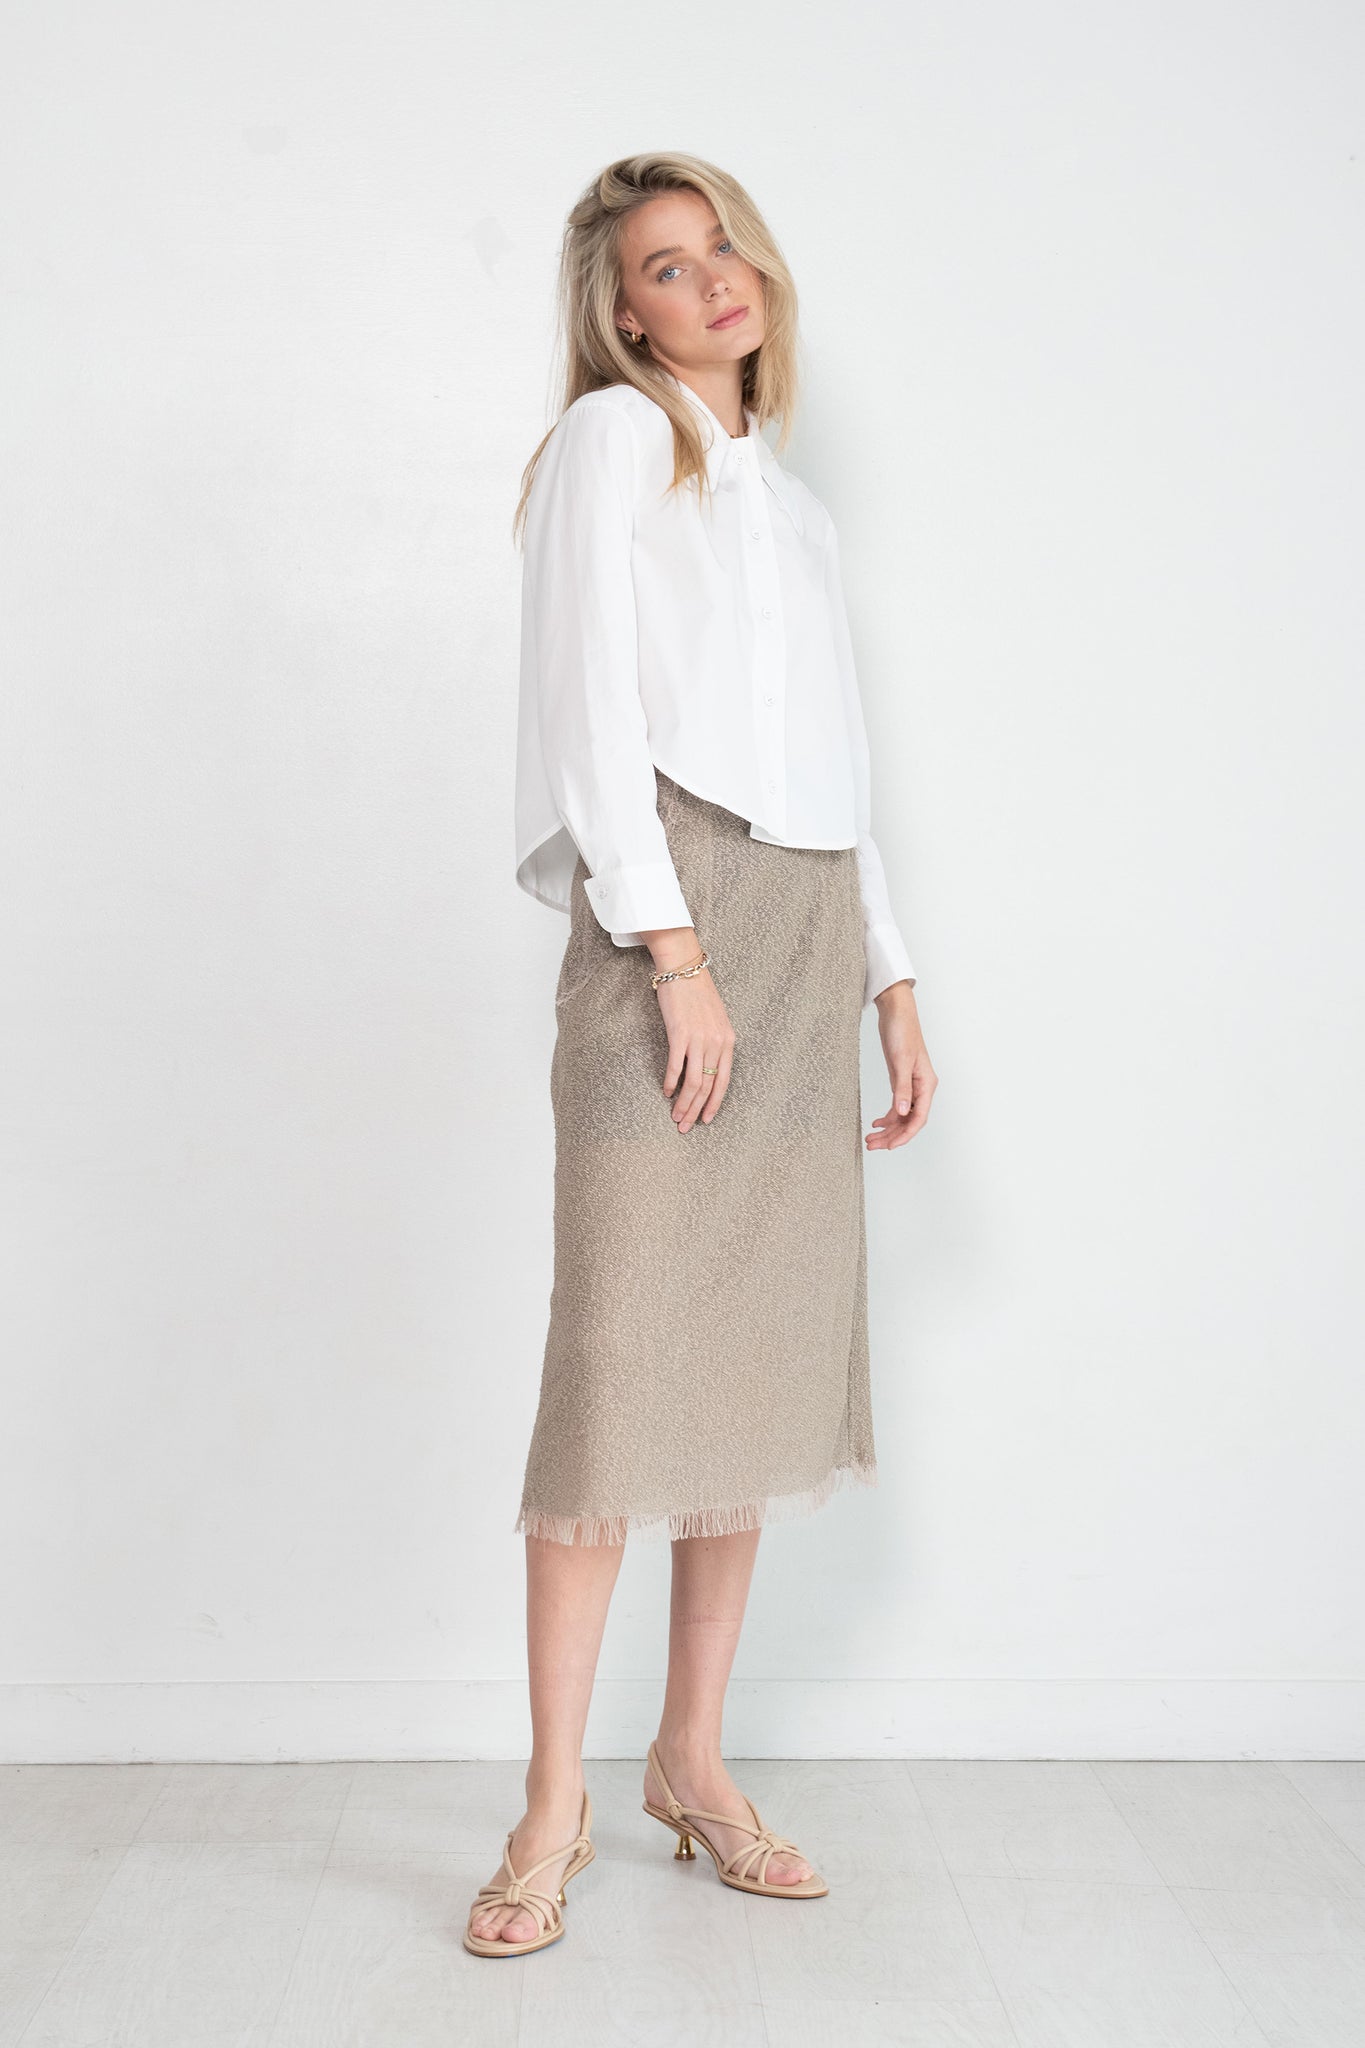 Veronique Leroy - Rounded Collar Shirt, White